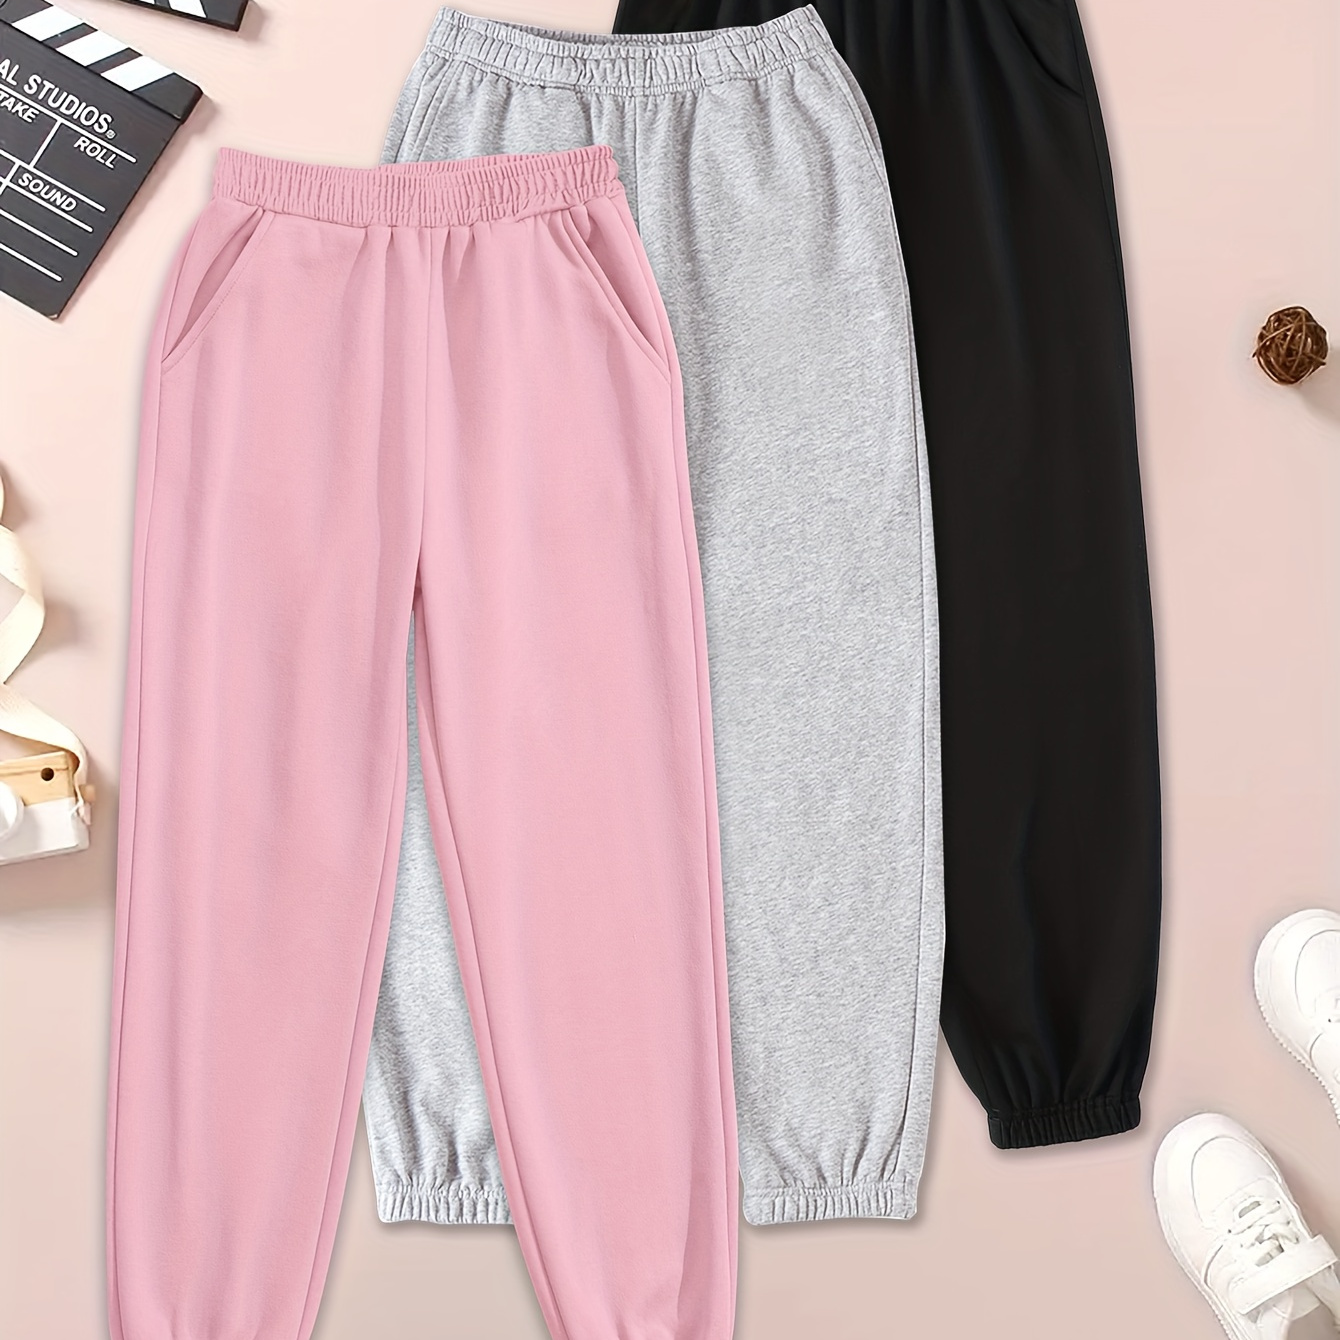 

3pcs Girls Basic Sweatpants Set Lightweight Comfy Casual Joggers Pants For Sports Running/ Outdoor